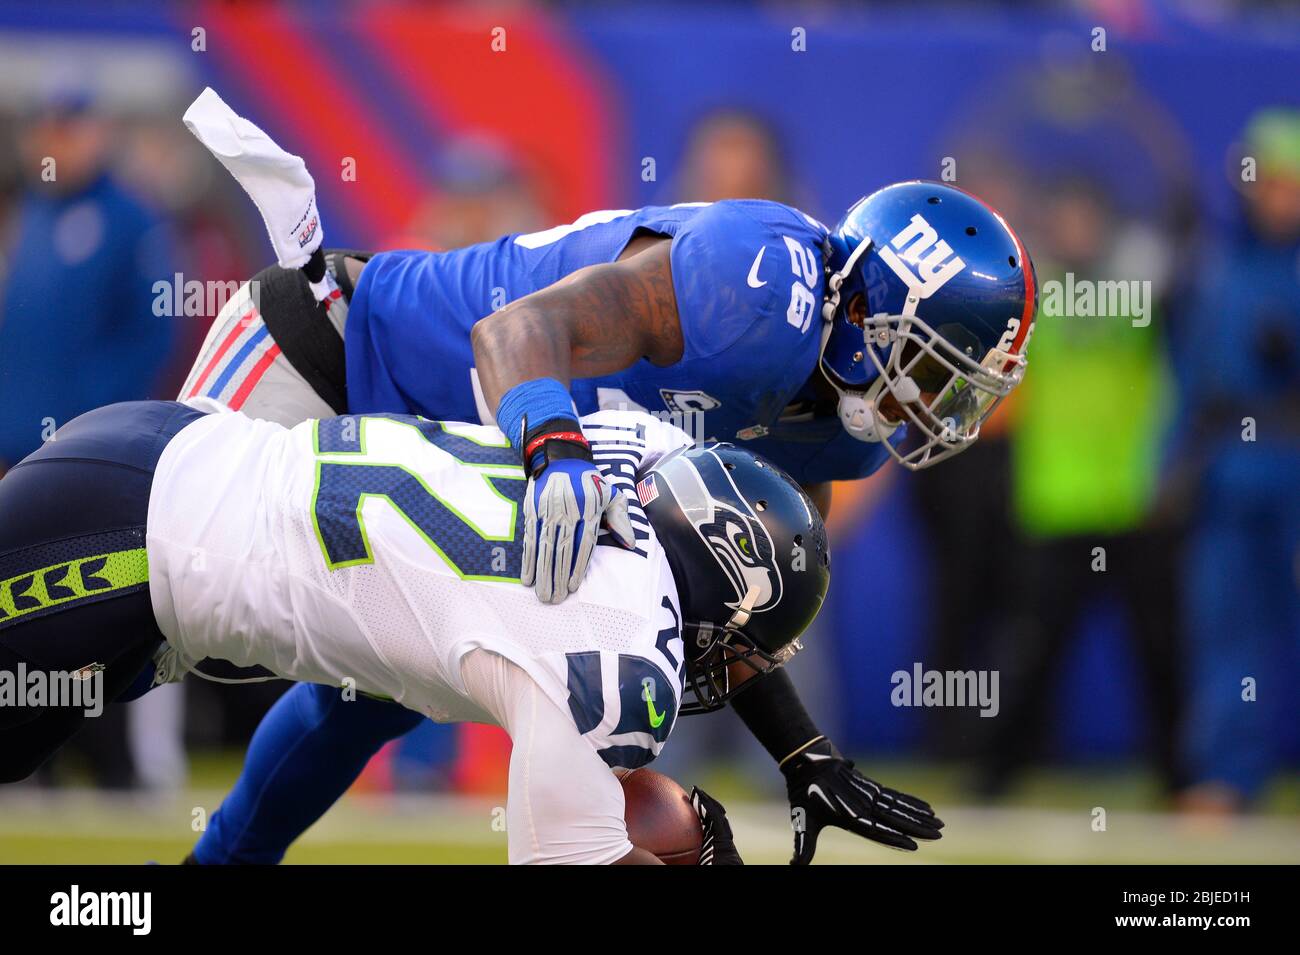 December 15, 2013: New York Giants strong safety Antrel Rolle (26) puts a hard hit on Seattle Seahawks running back Robert Turbin (22) during the firs Stock Photo